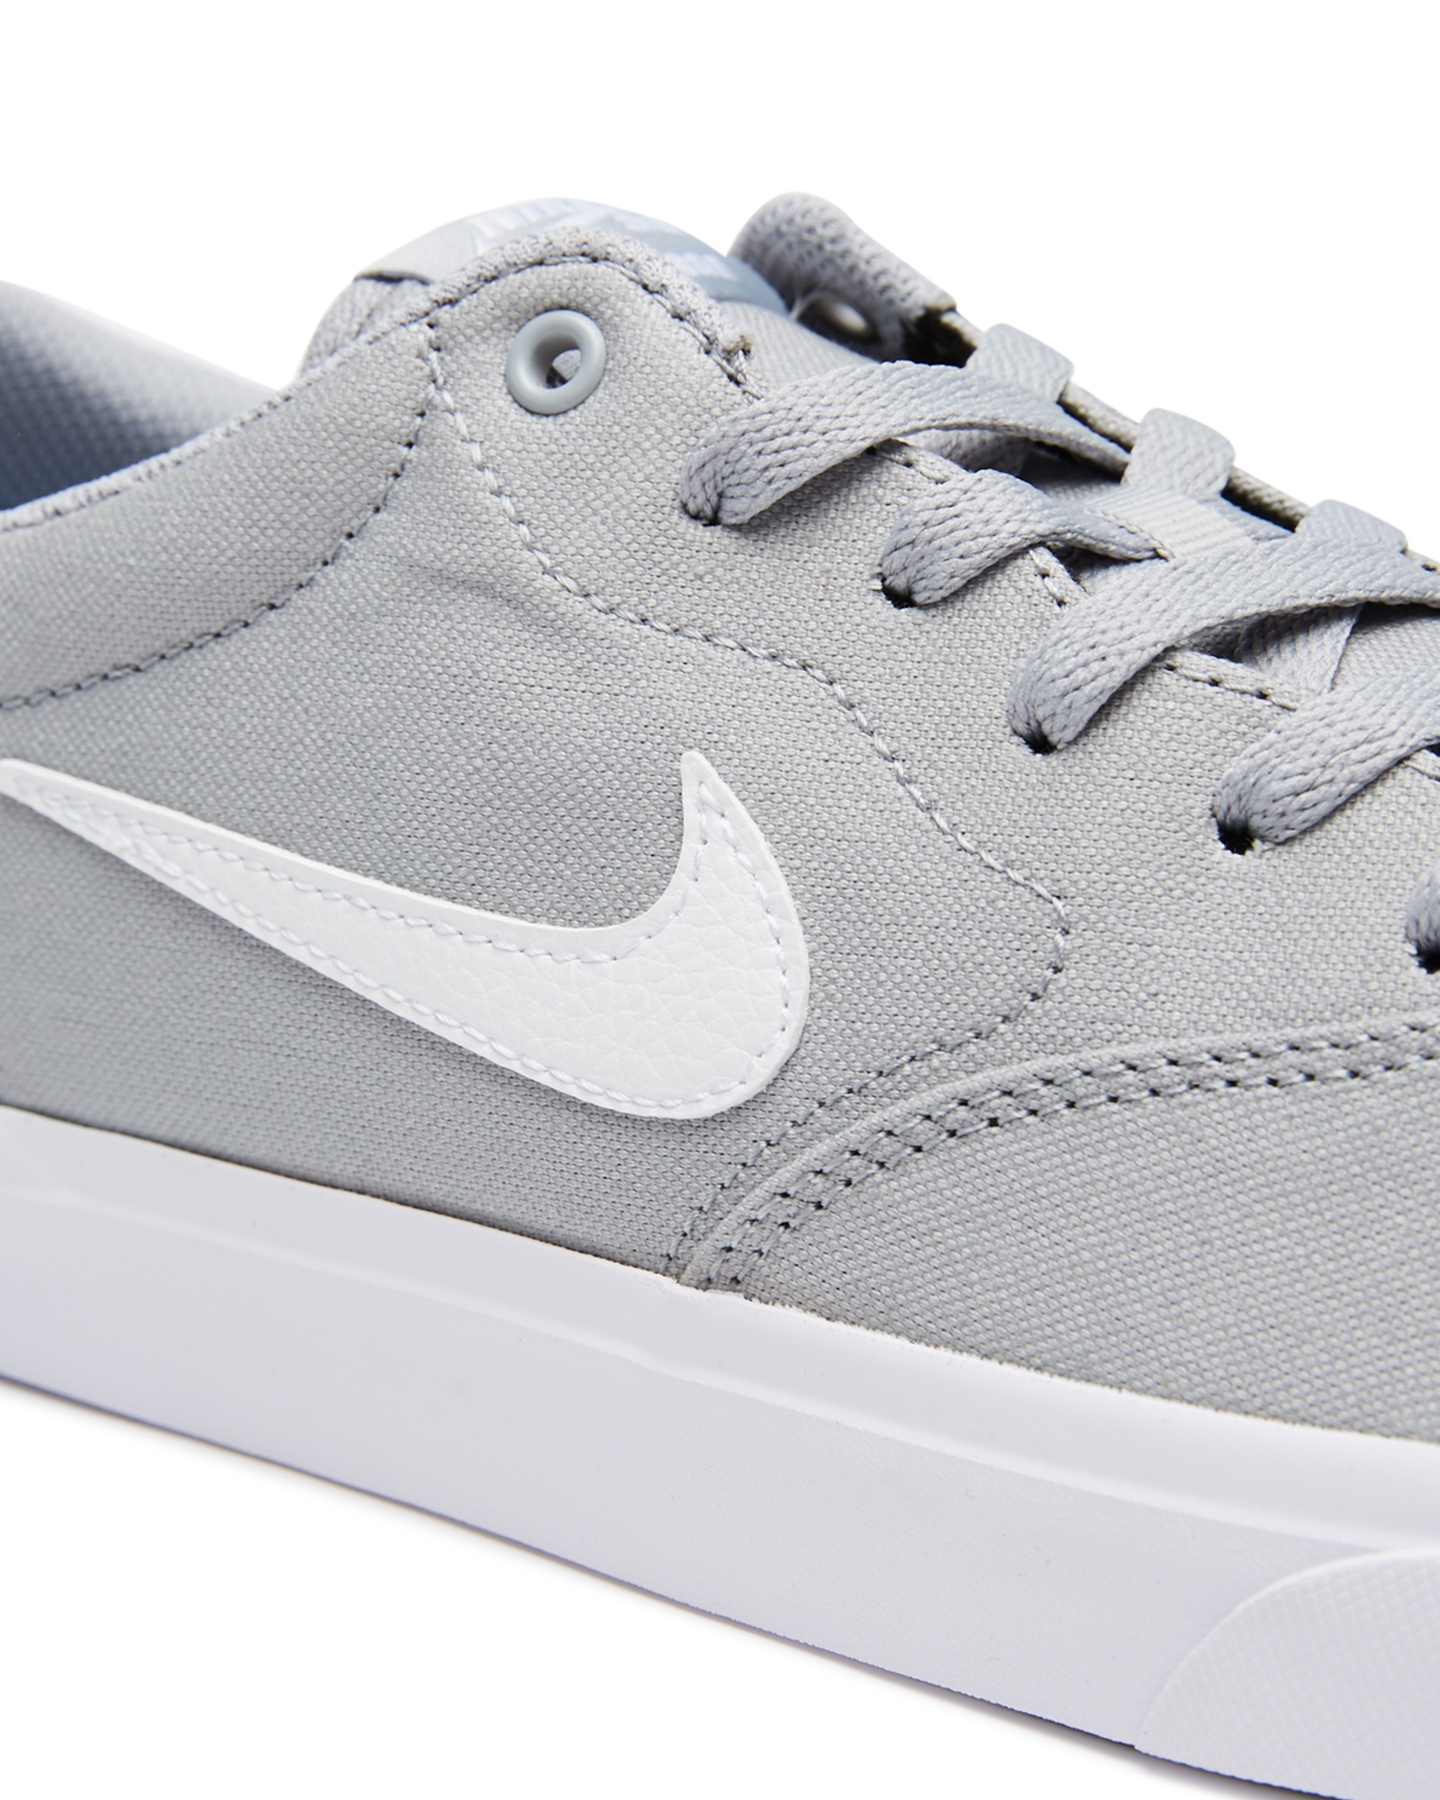 Nike Mens Sb Charge Shoe - Wolf Grey | SurfStitch